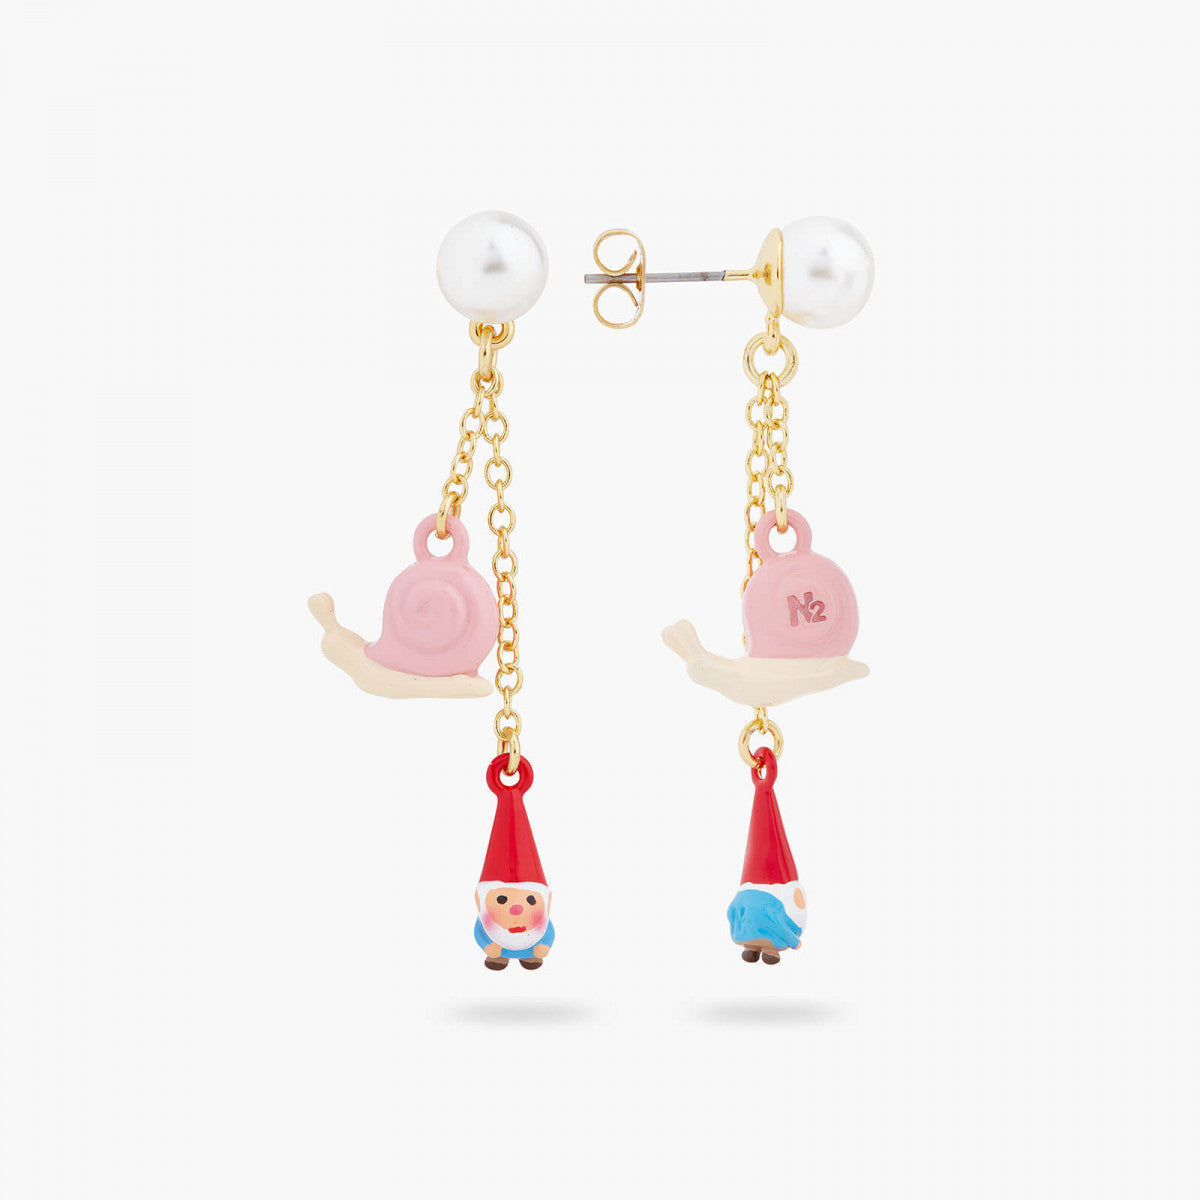 GARDEN GNOME AND SNAIL POST EARRINGS